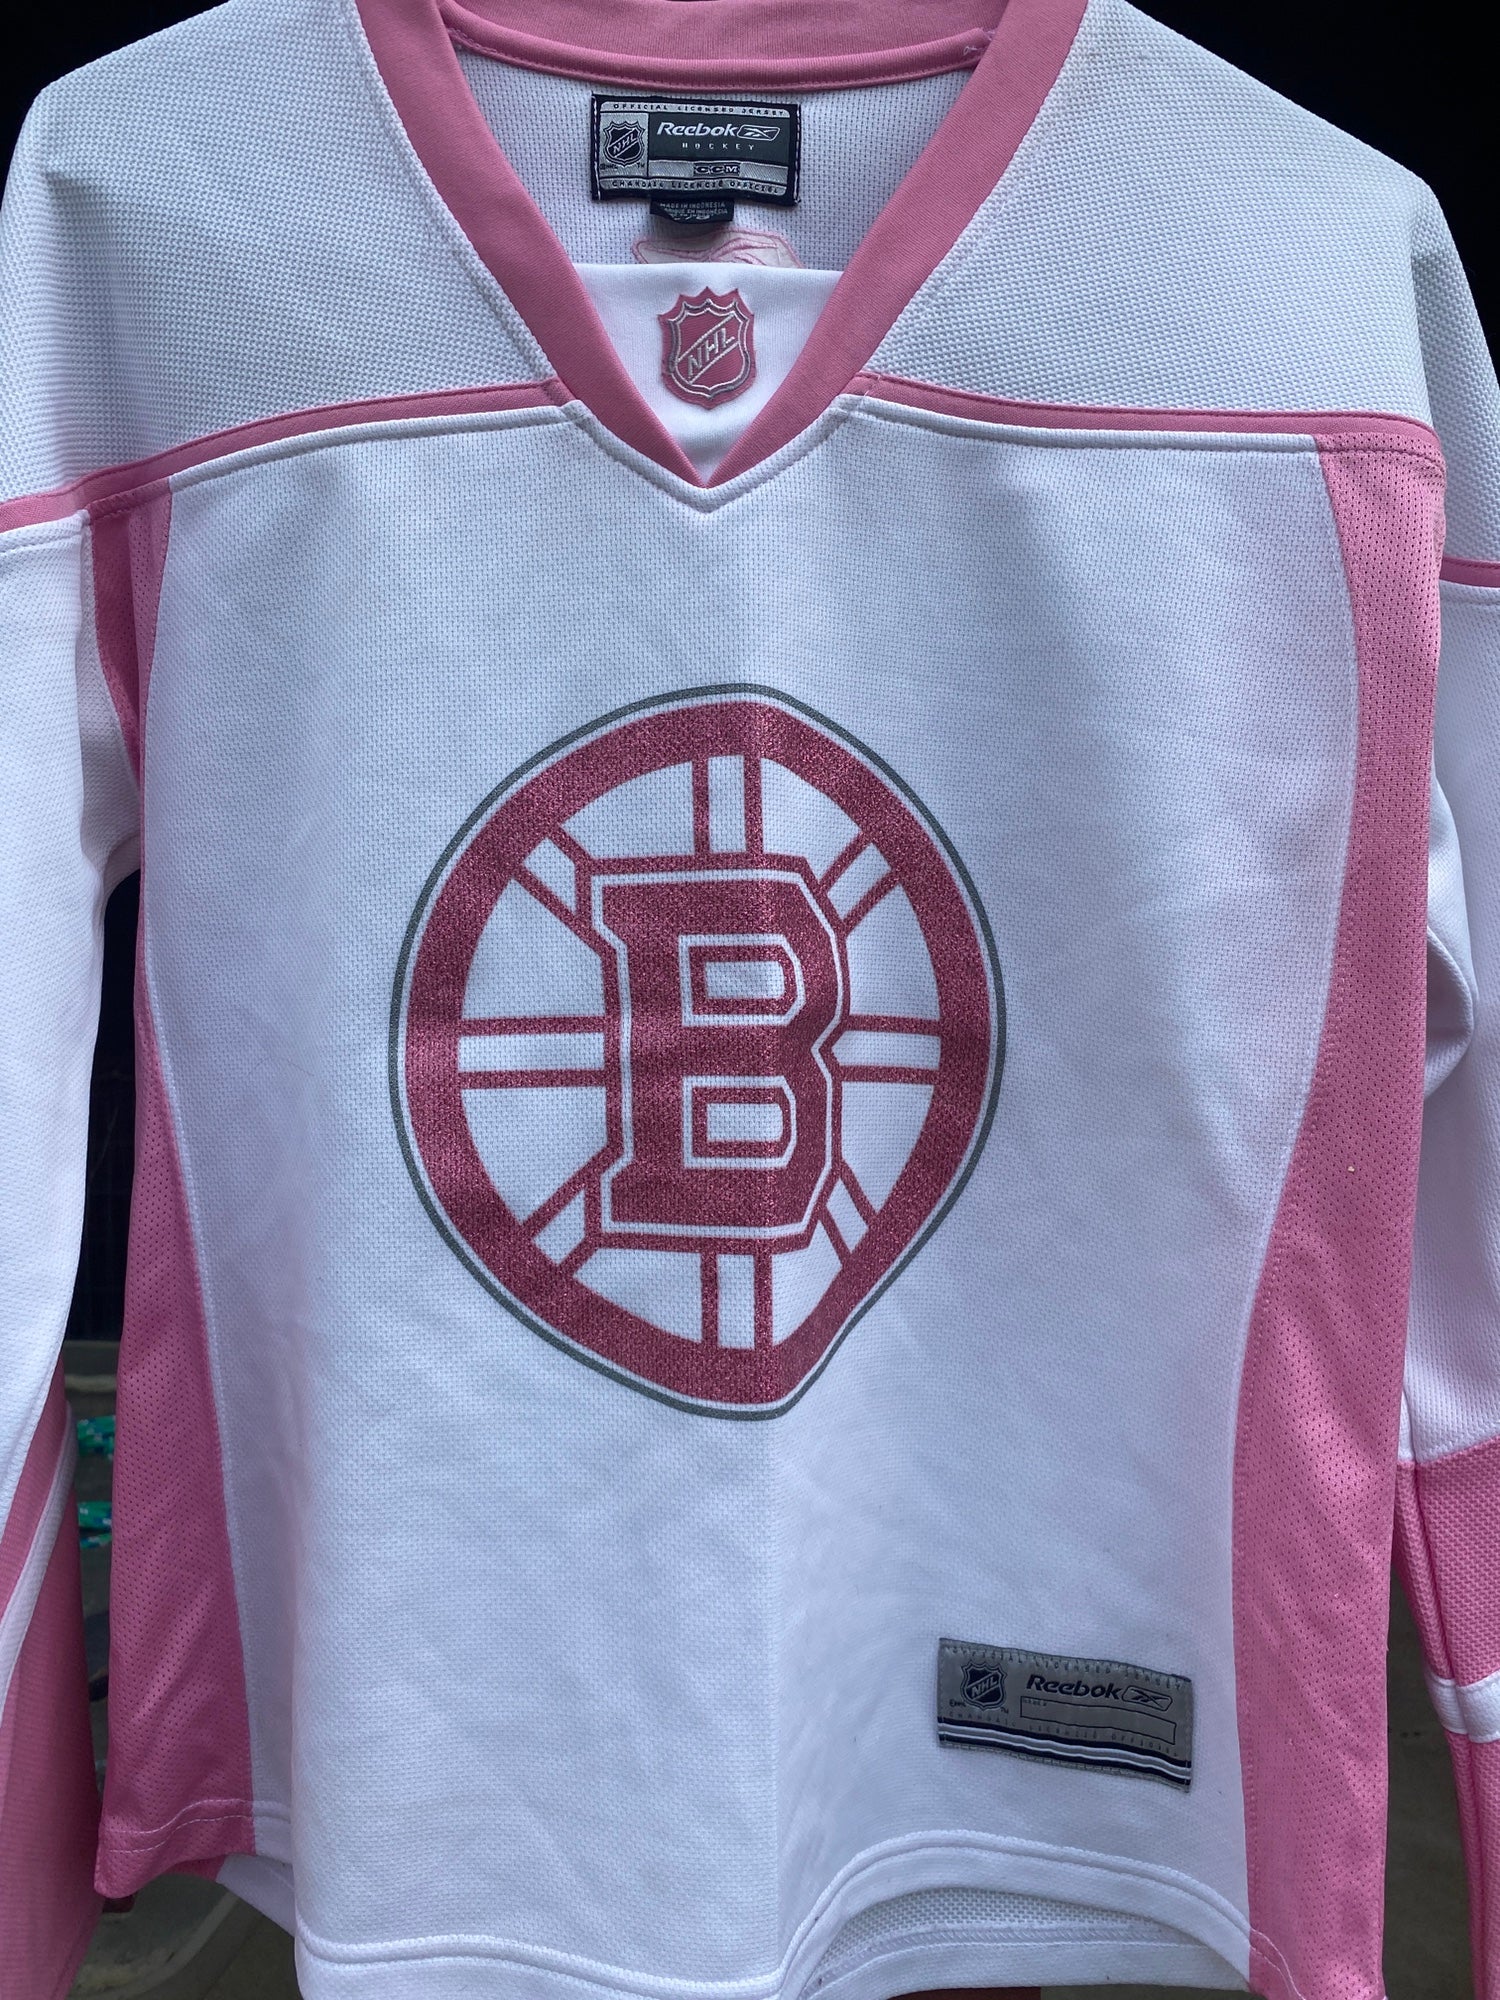 Boston Bruins Jersey For Babies, Youth, Women, or Men